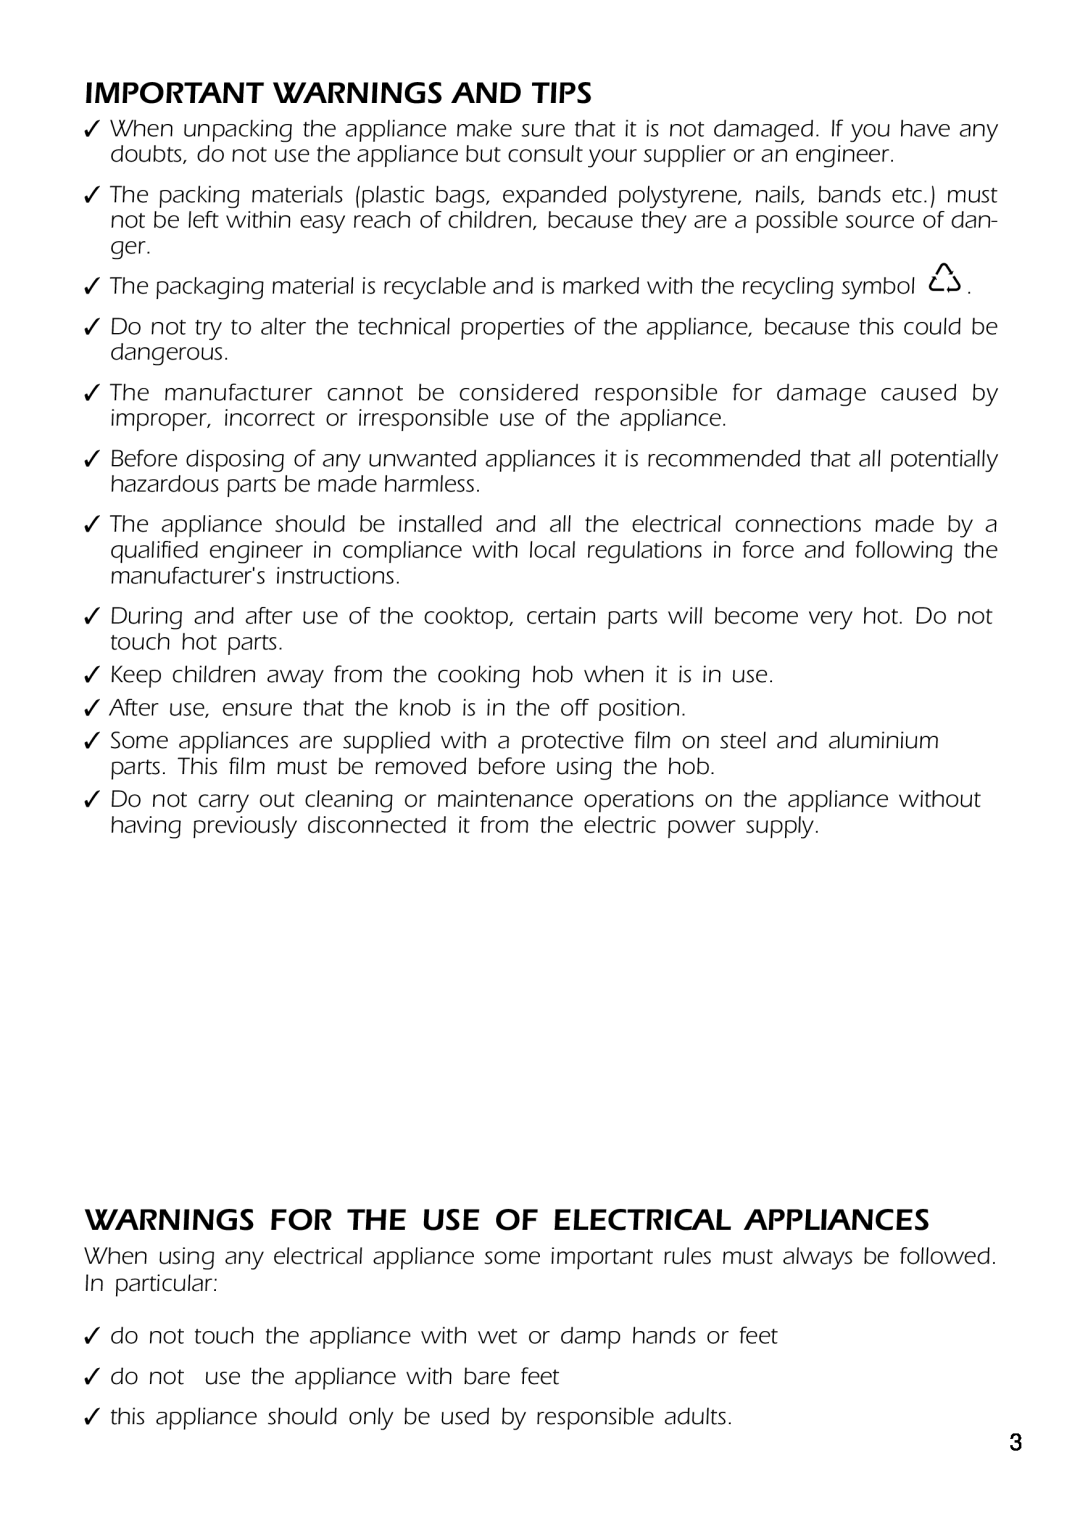 CDA HCC310 manual Important Warnings And Tips, Warnings For The Use Of Electrical Appliances 